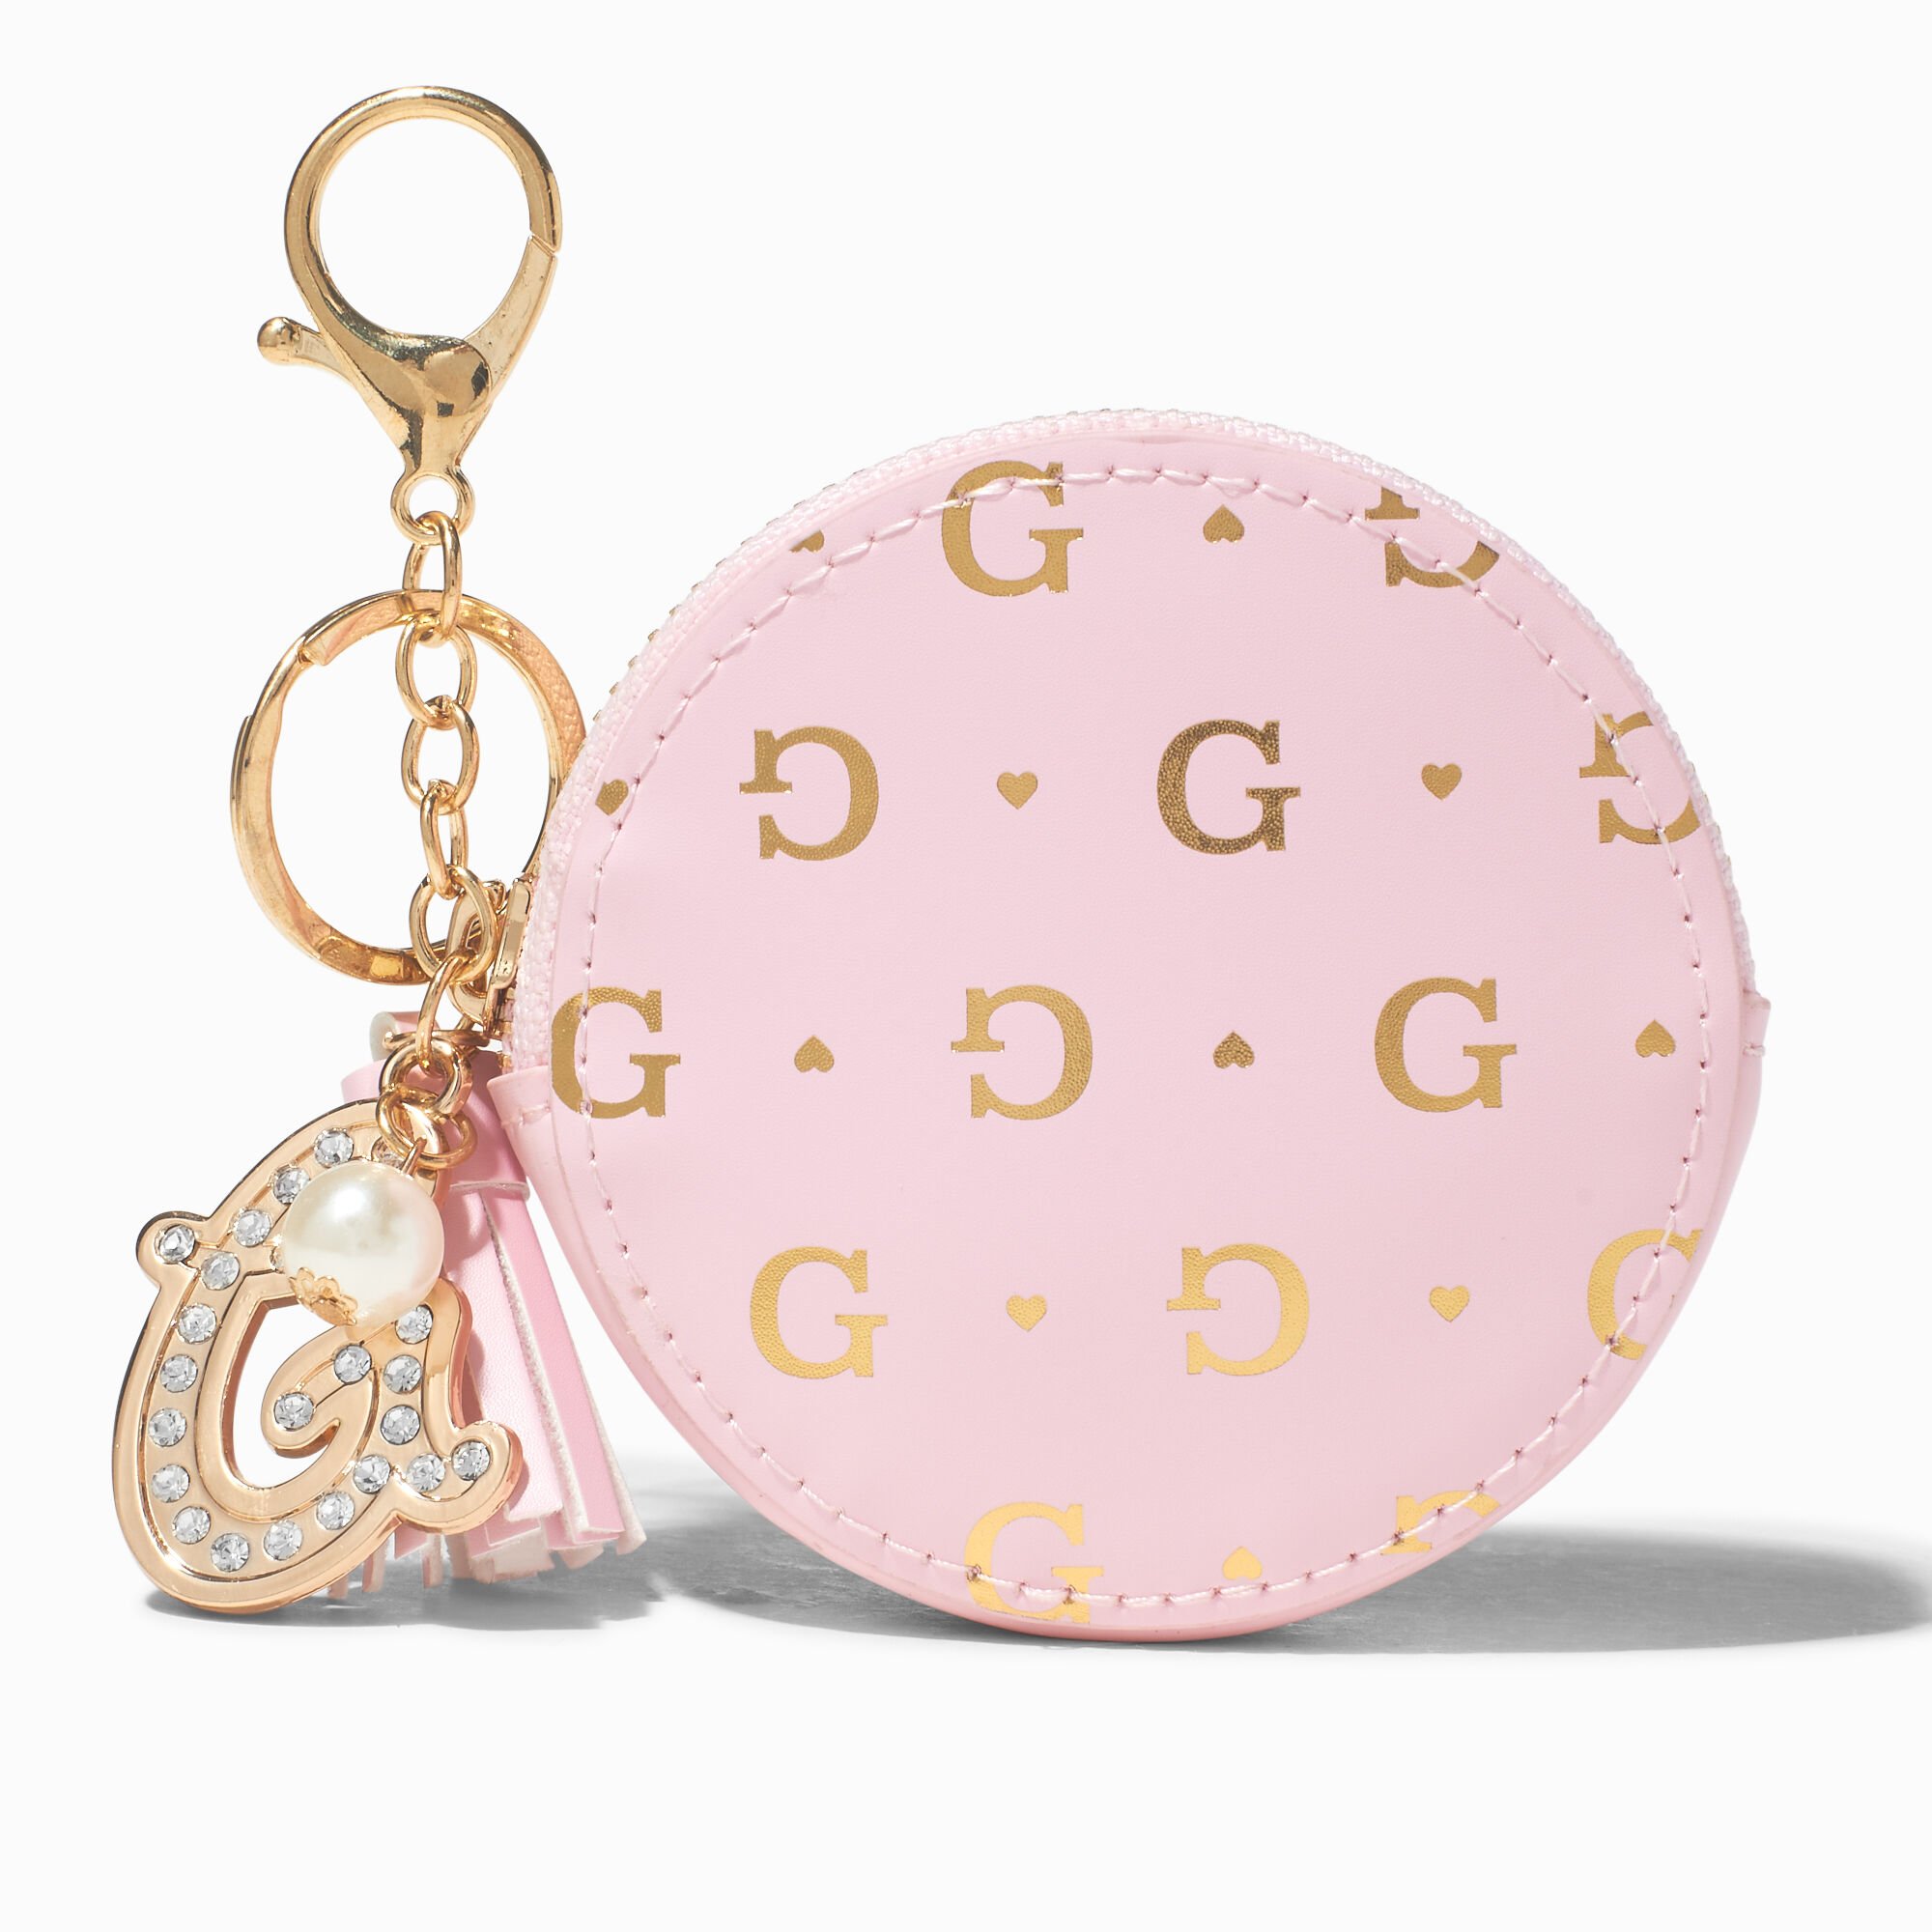 View Claires en Initial Coin Purse G Gold information